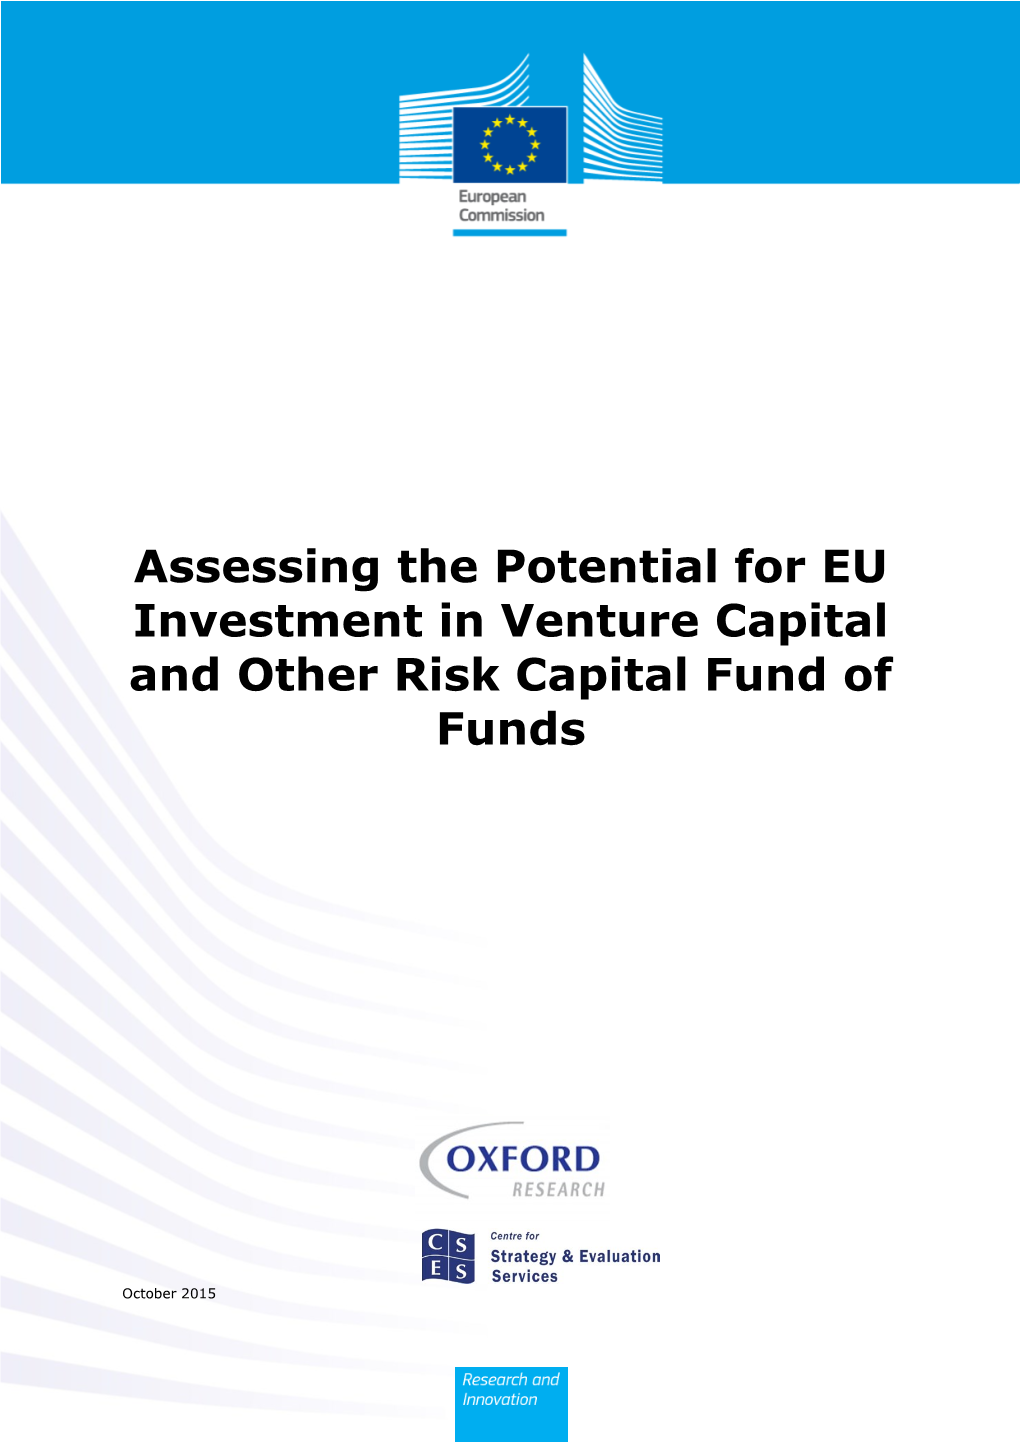 Assessing the Potential for EU Investment in Venture Capital and Other Risk Capital Fund of Funds